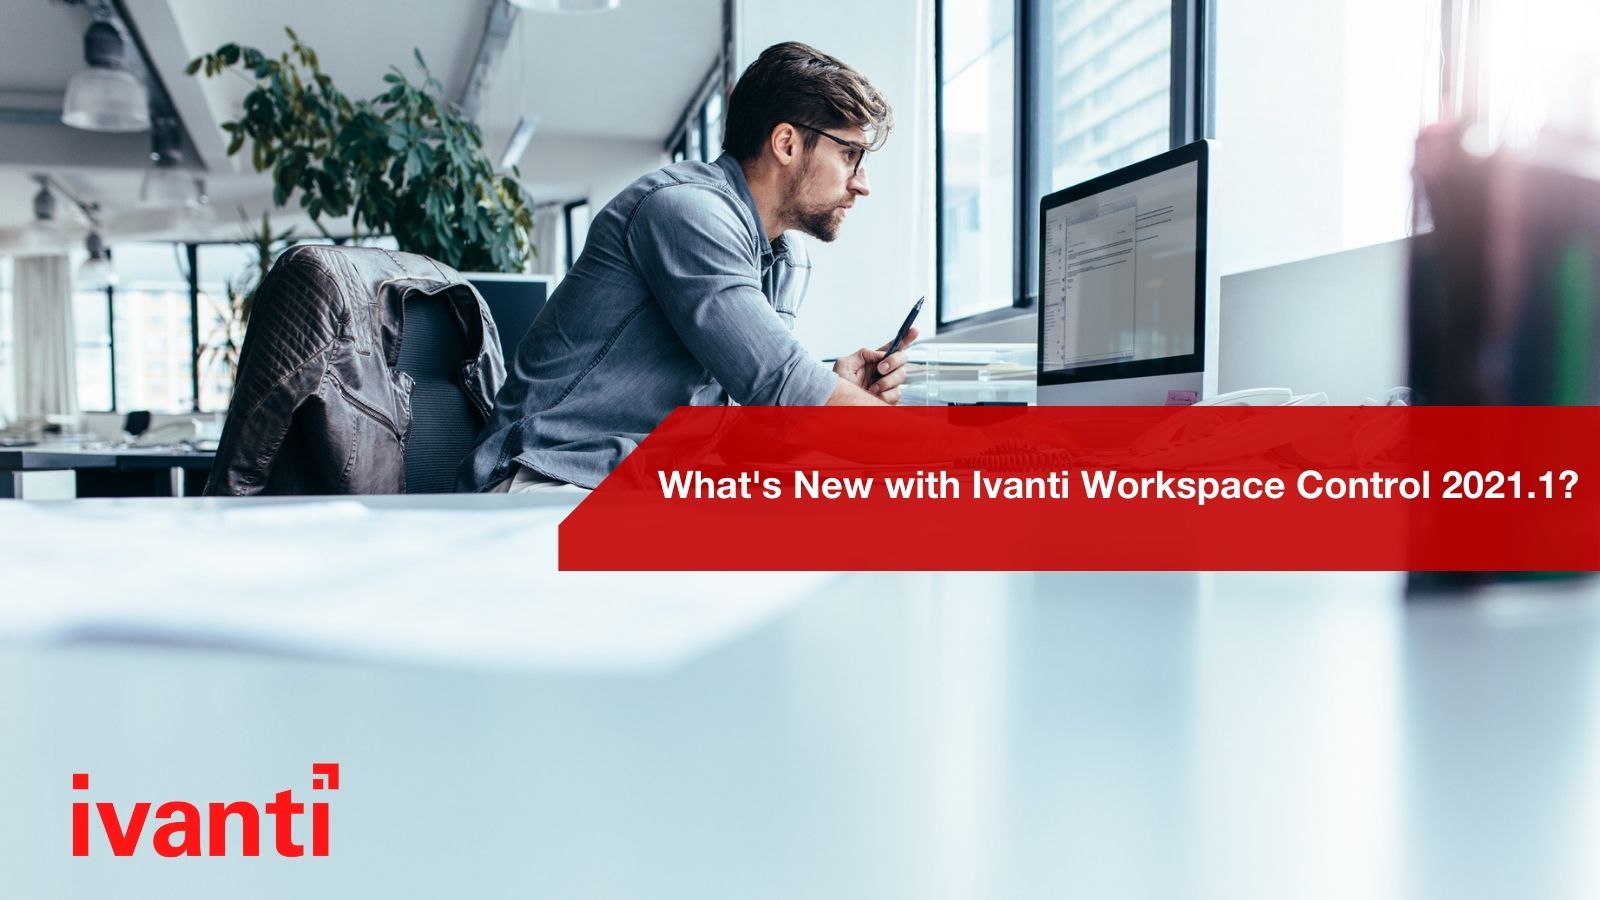 What's New with Ivanti Workspace Control 2021.1? 